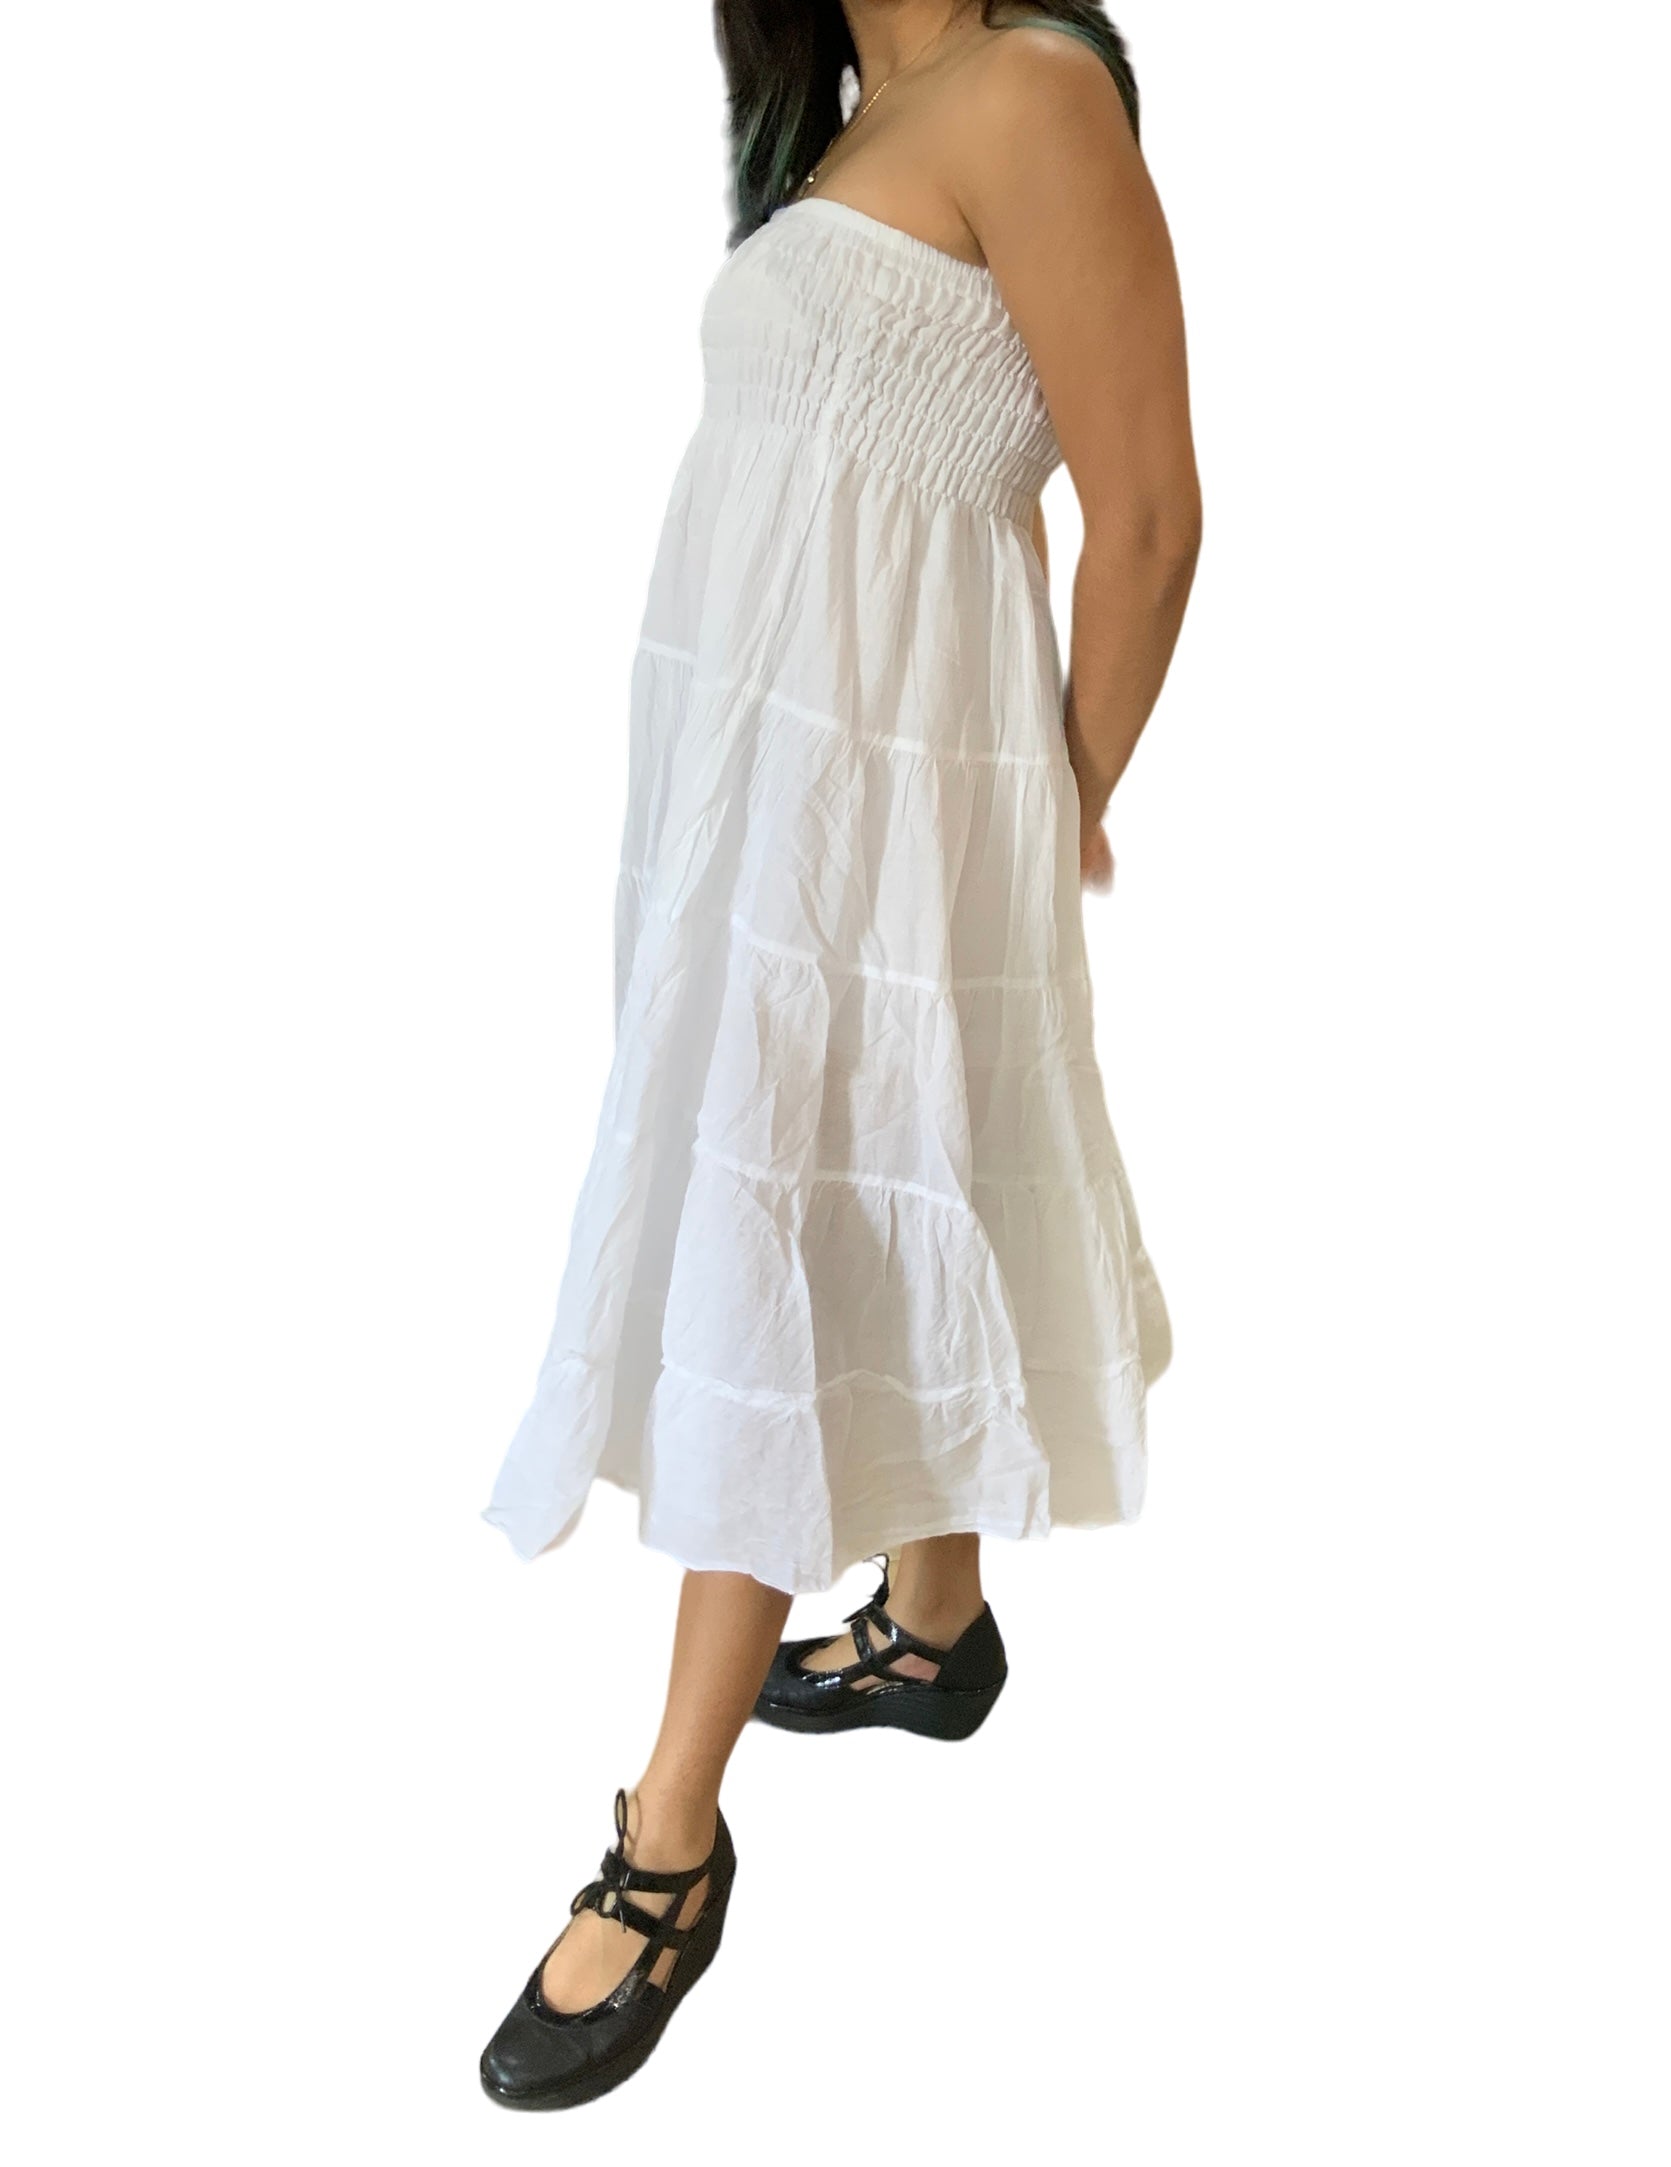 White Cotton Voile Tiered Skirt